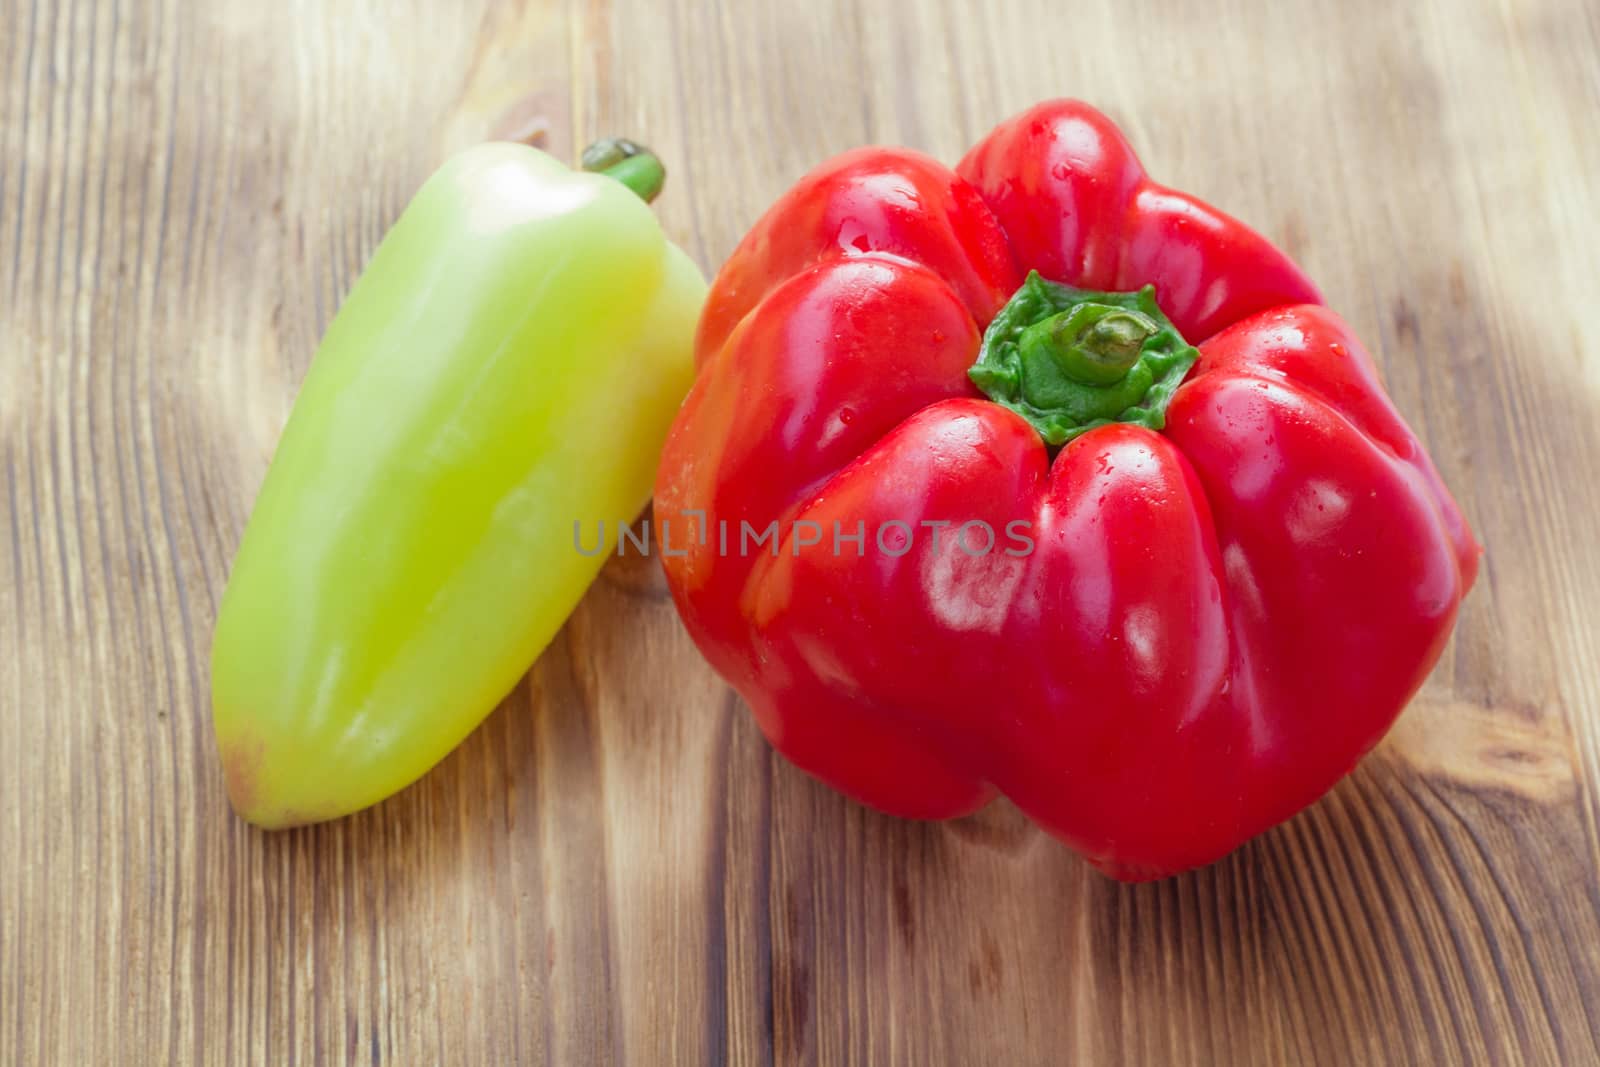 Vegetable still life of two mature red and green peppers on wooden background